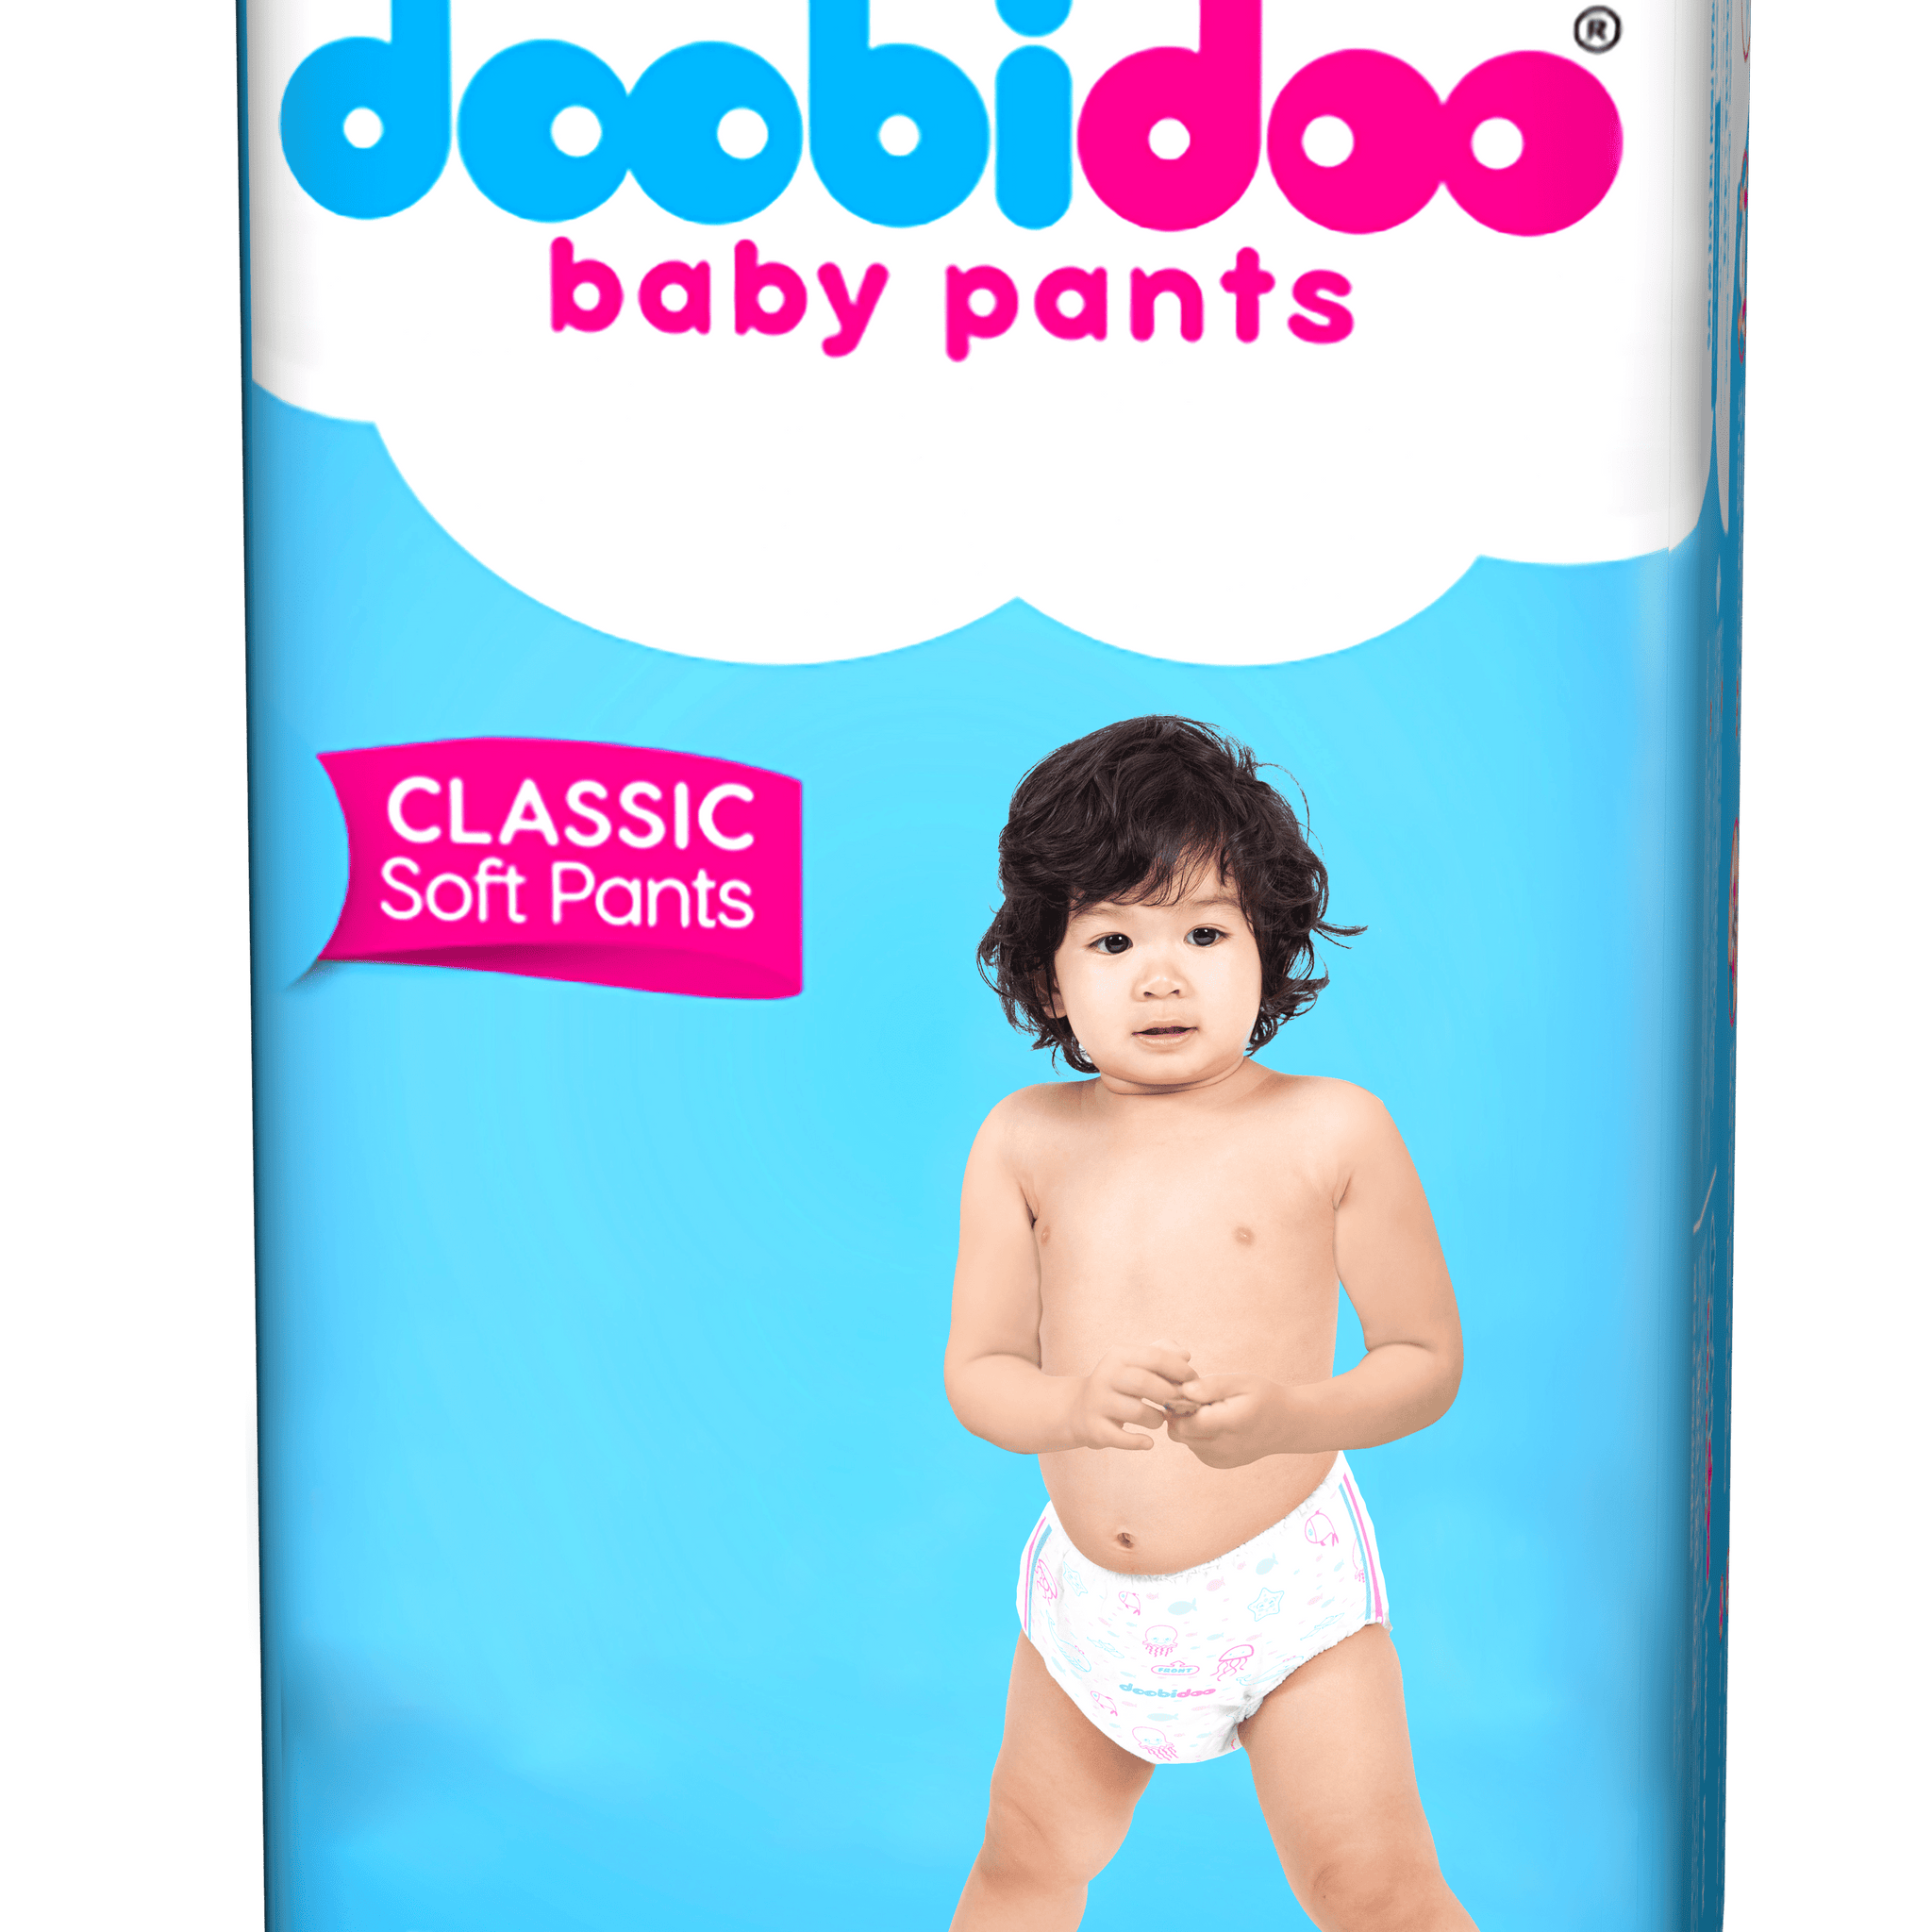 Doobidoo Classic Soft Baby Pant Diapers with Diamond Channels - XL (26 count)